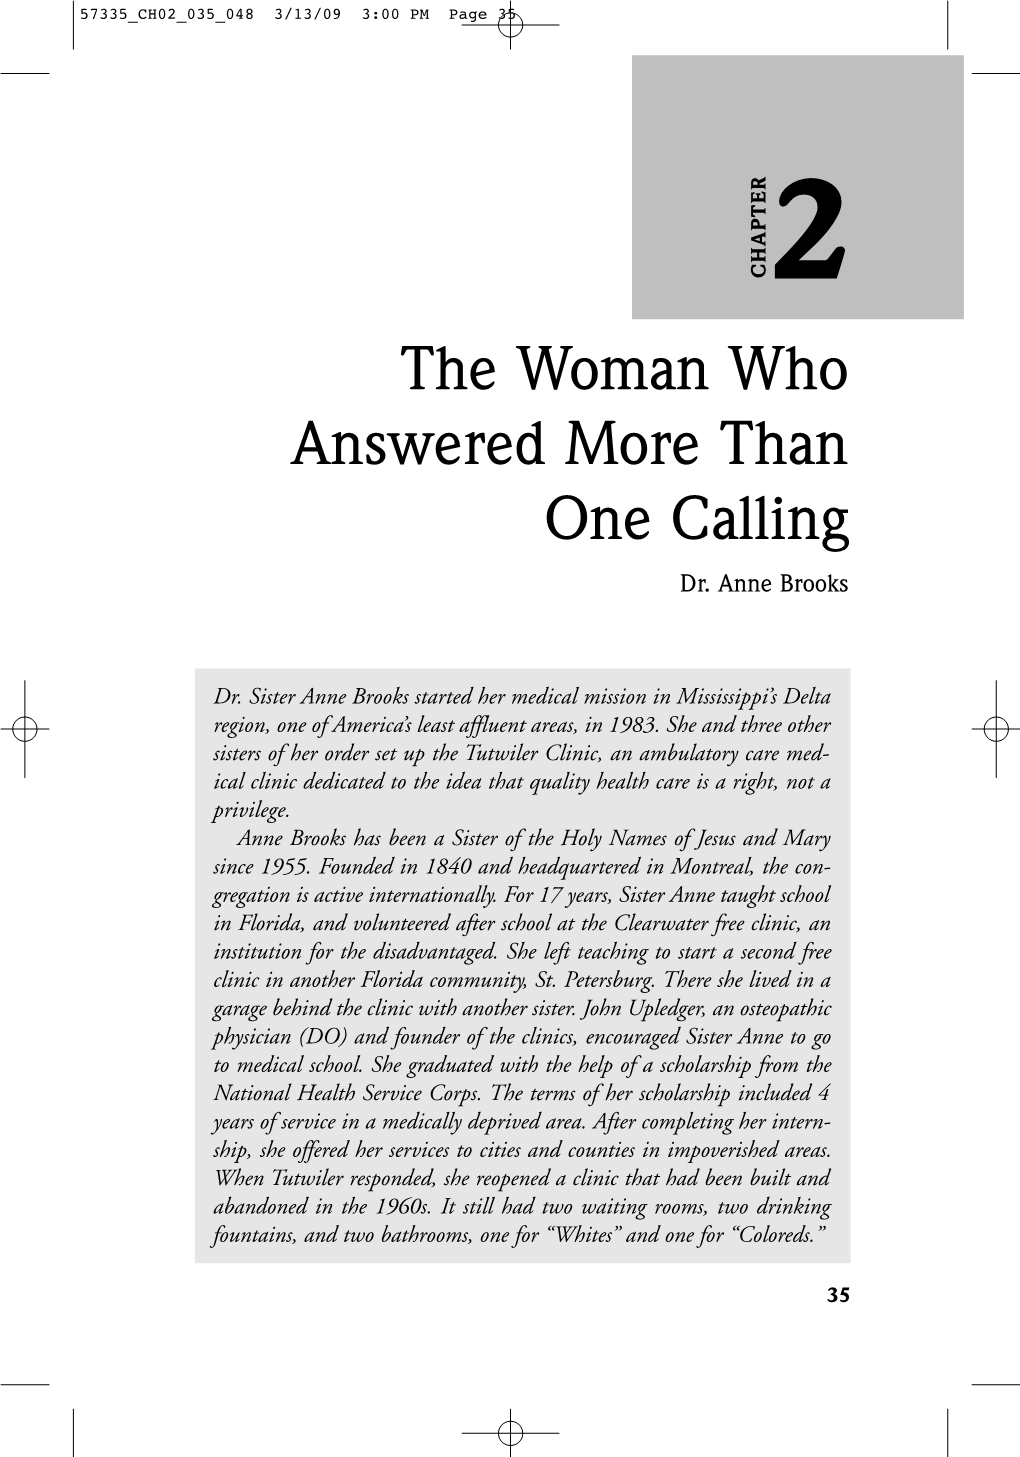 The Woman Who Answered More Than One Calling Dr